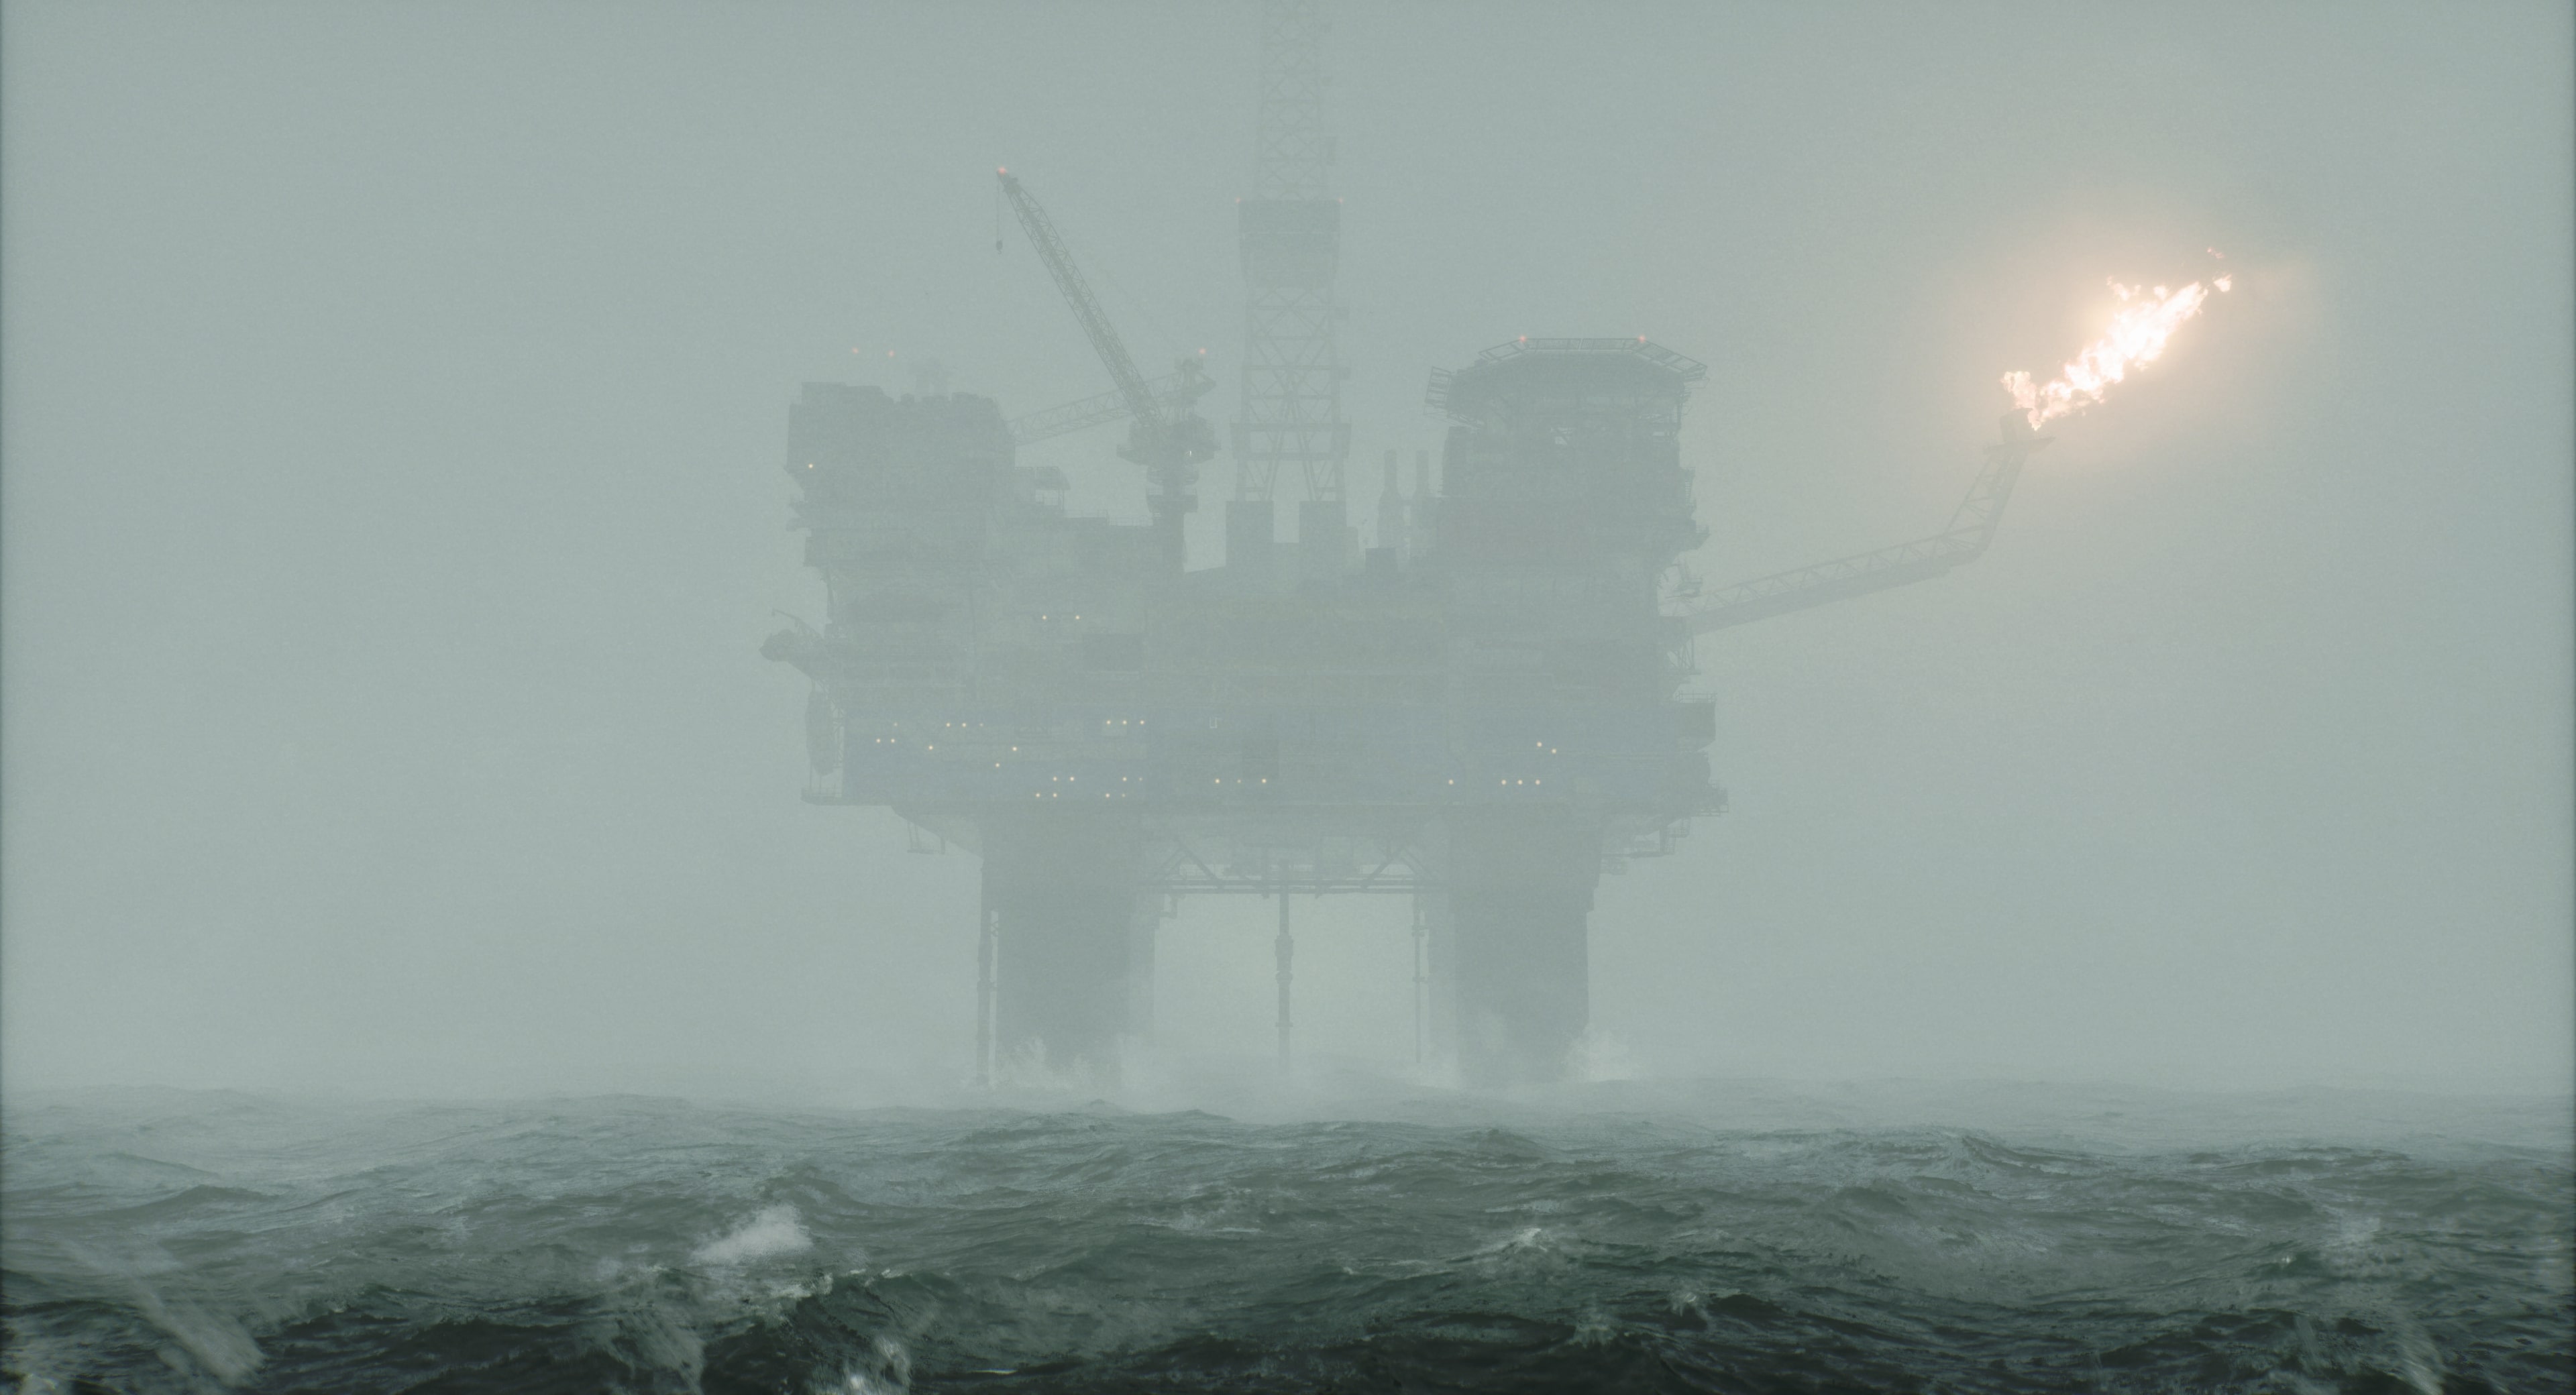 Still Wakes the Deep review: Horror, isolation, and the North Sea, all beautifully brought to life